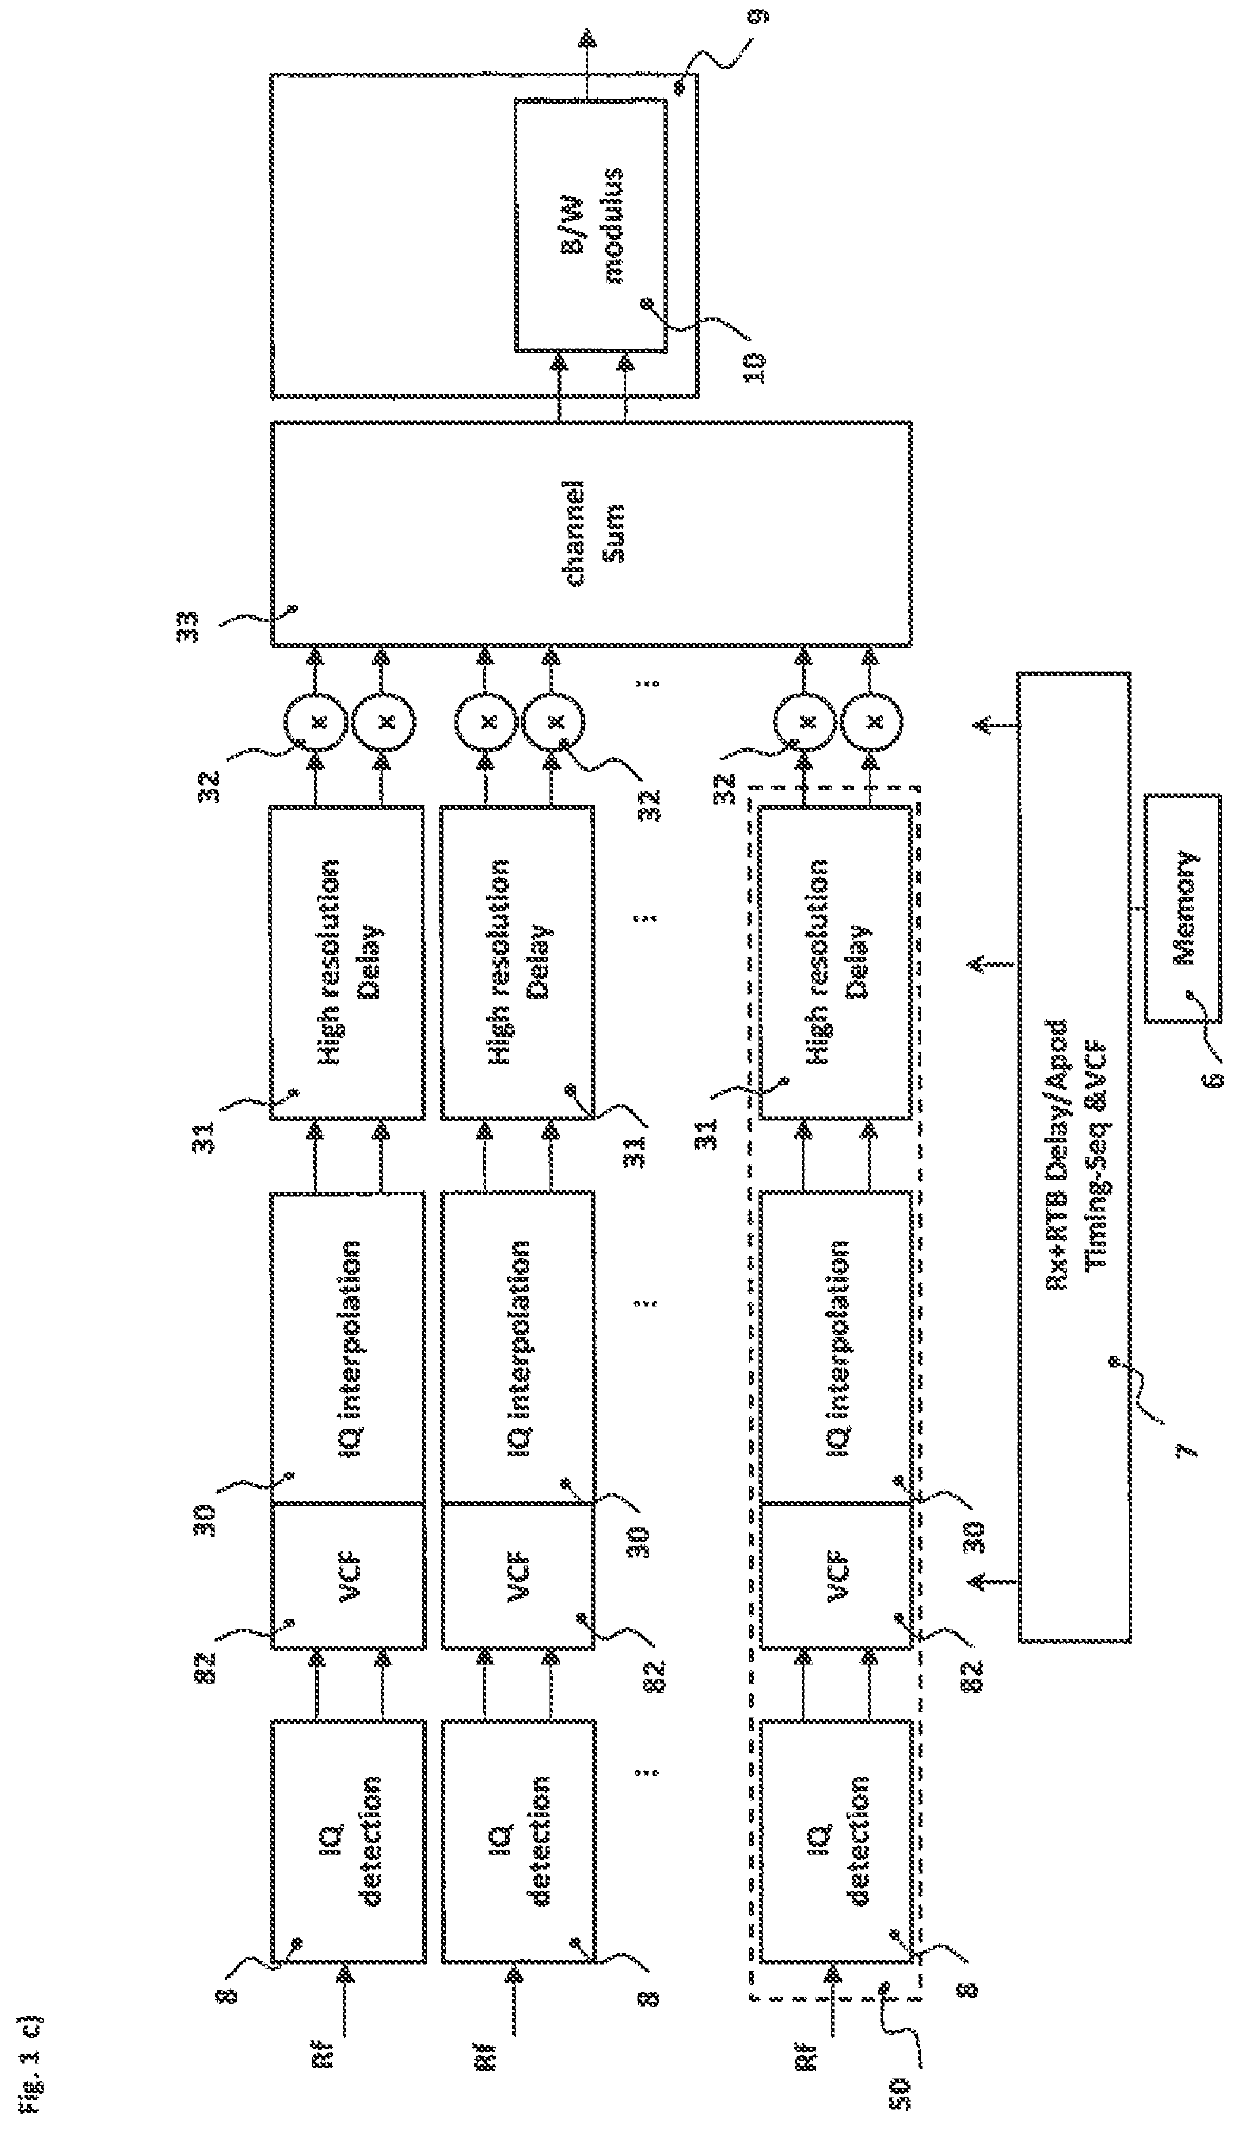 Systems and methods for distortion free multi beam ultrasound receive beamforming